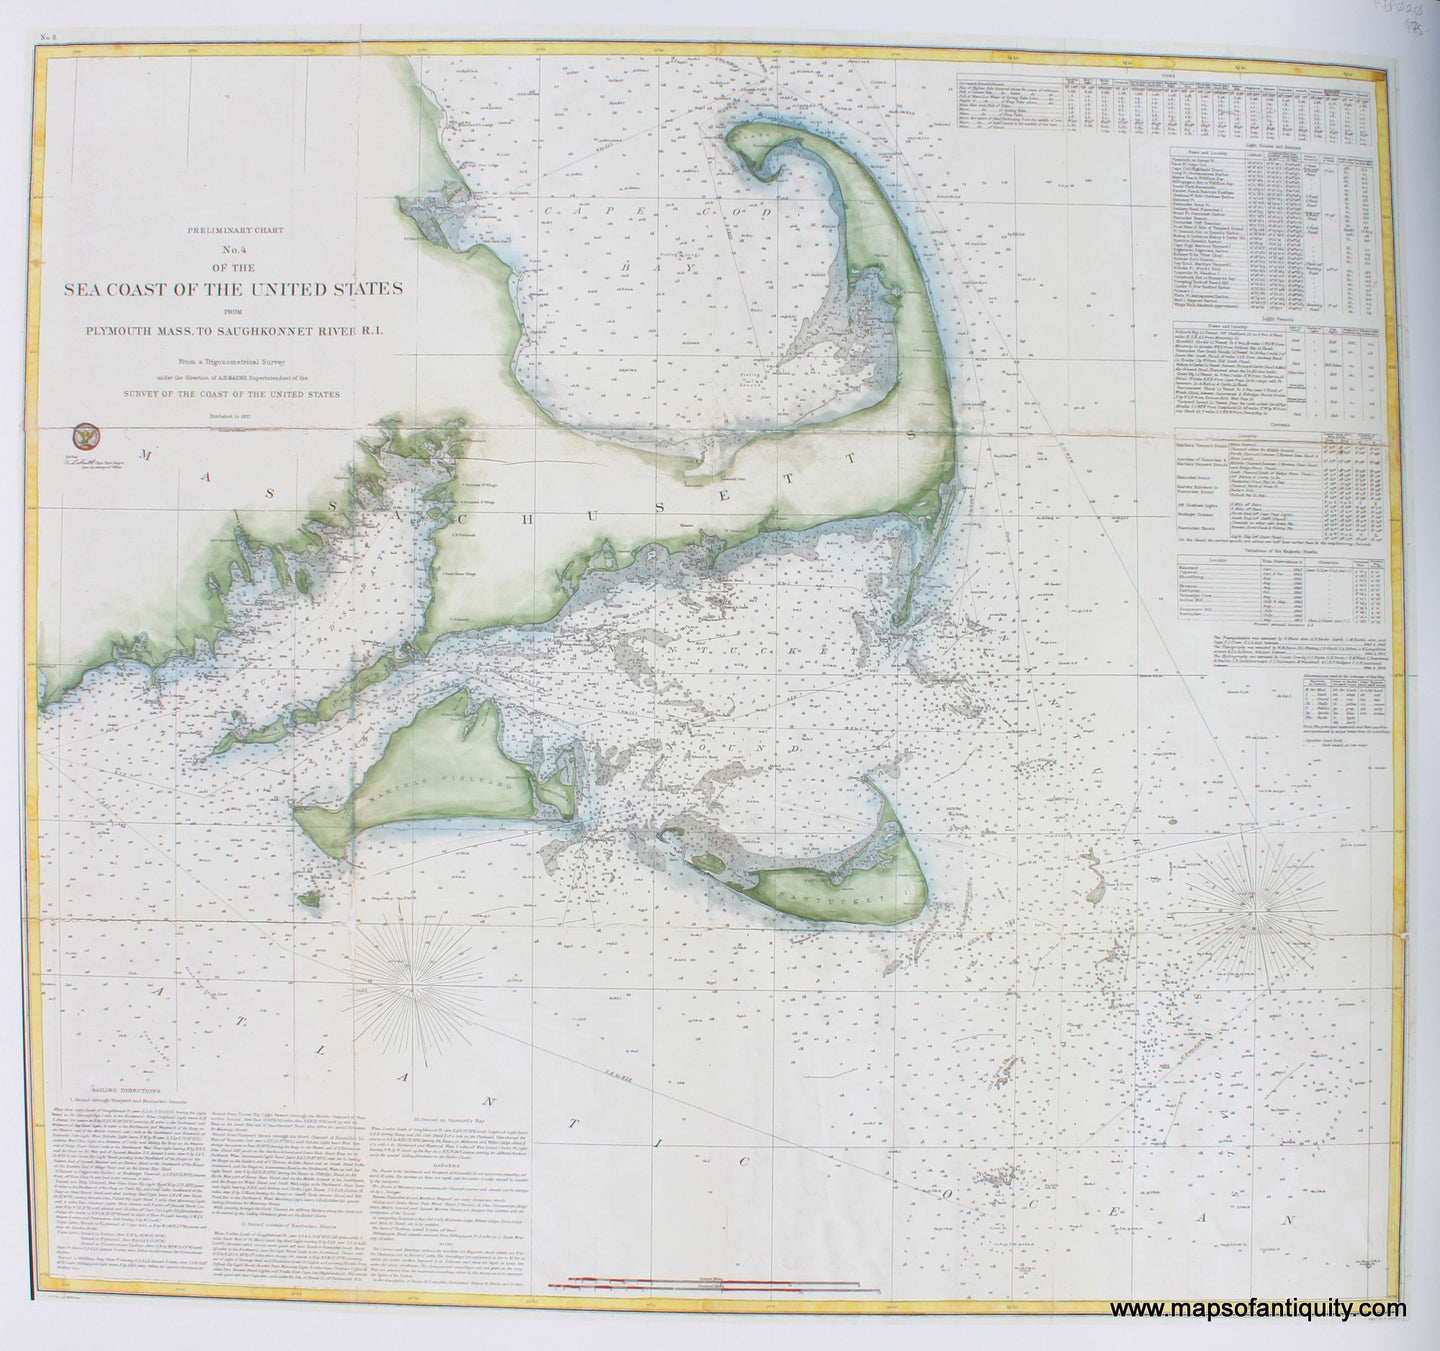 Reproduction-Map-Cape-Cod-Mass-to-Saughkonnett-R.I.-1857